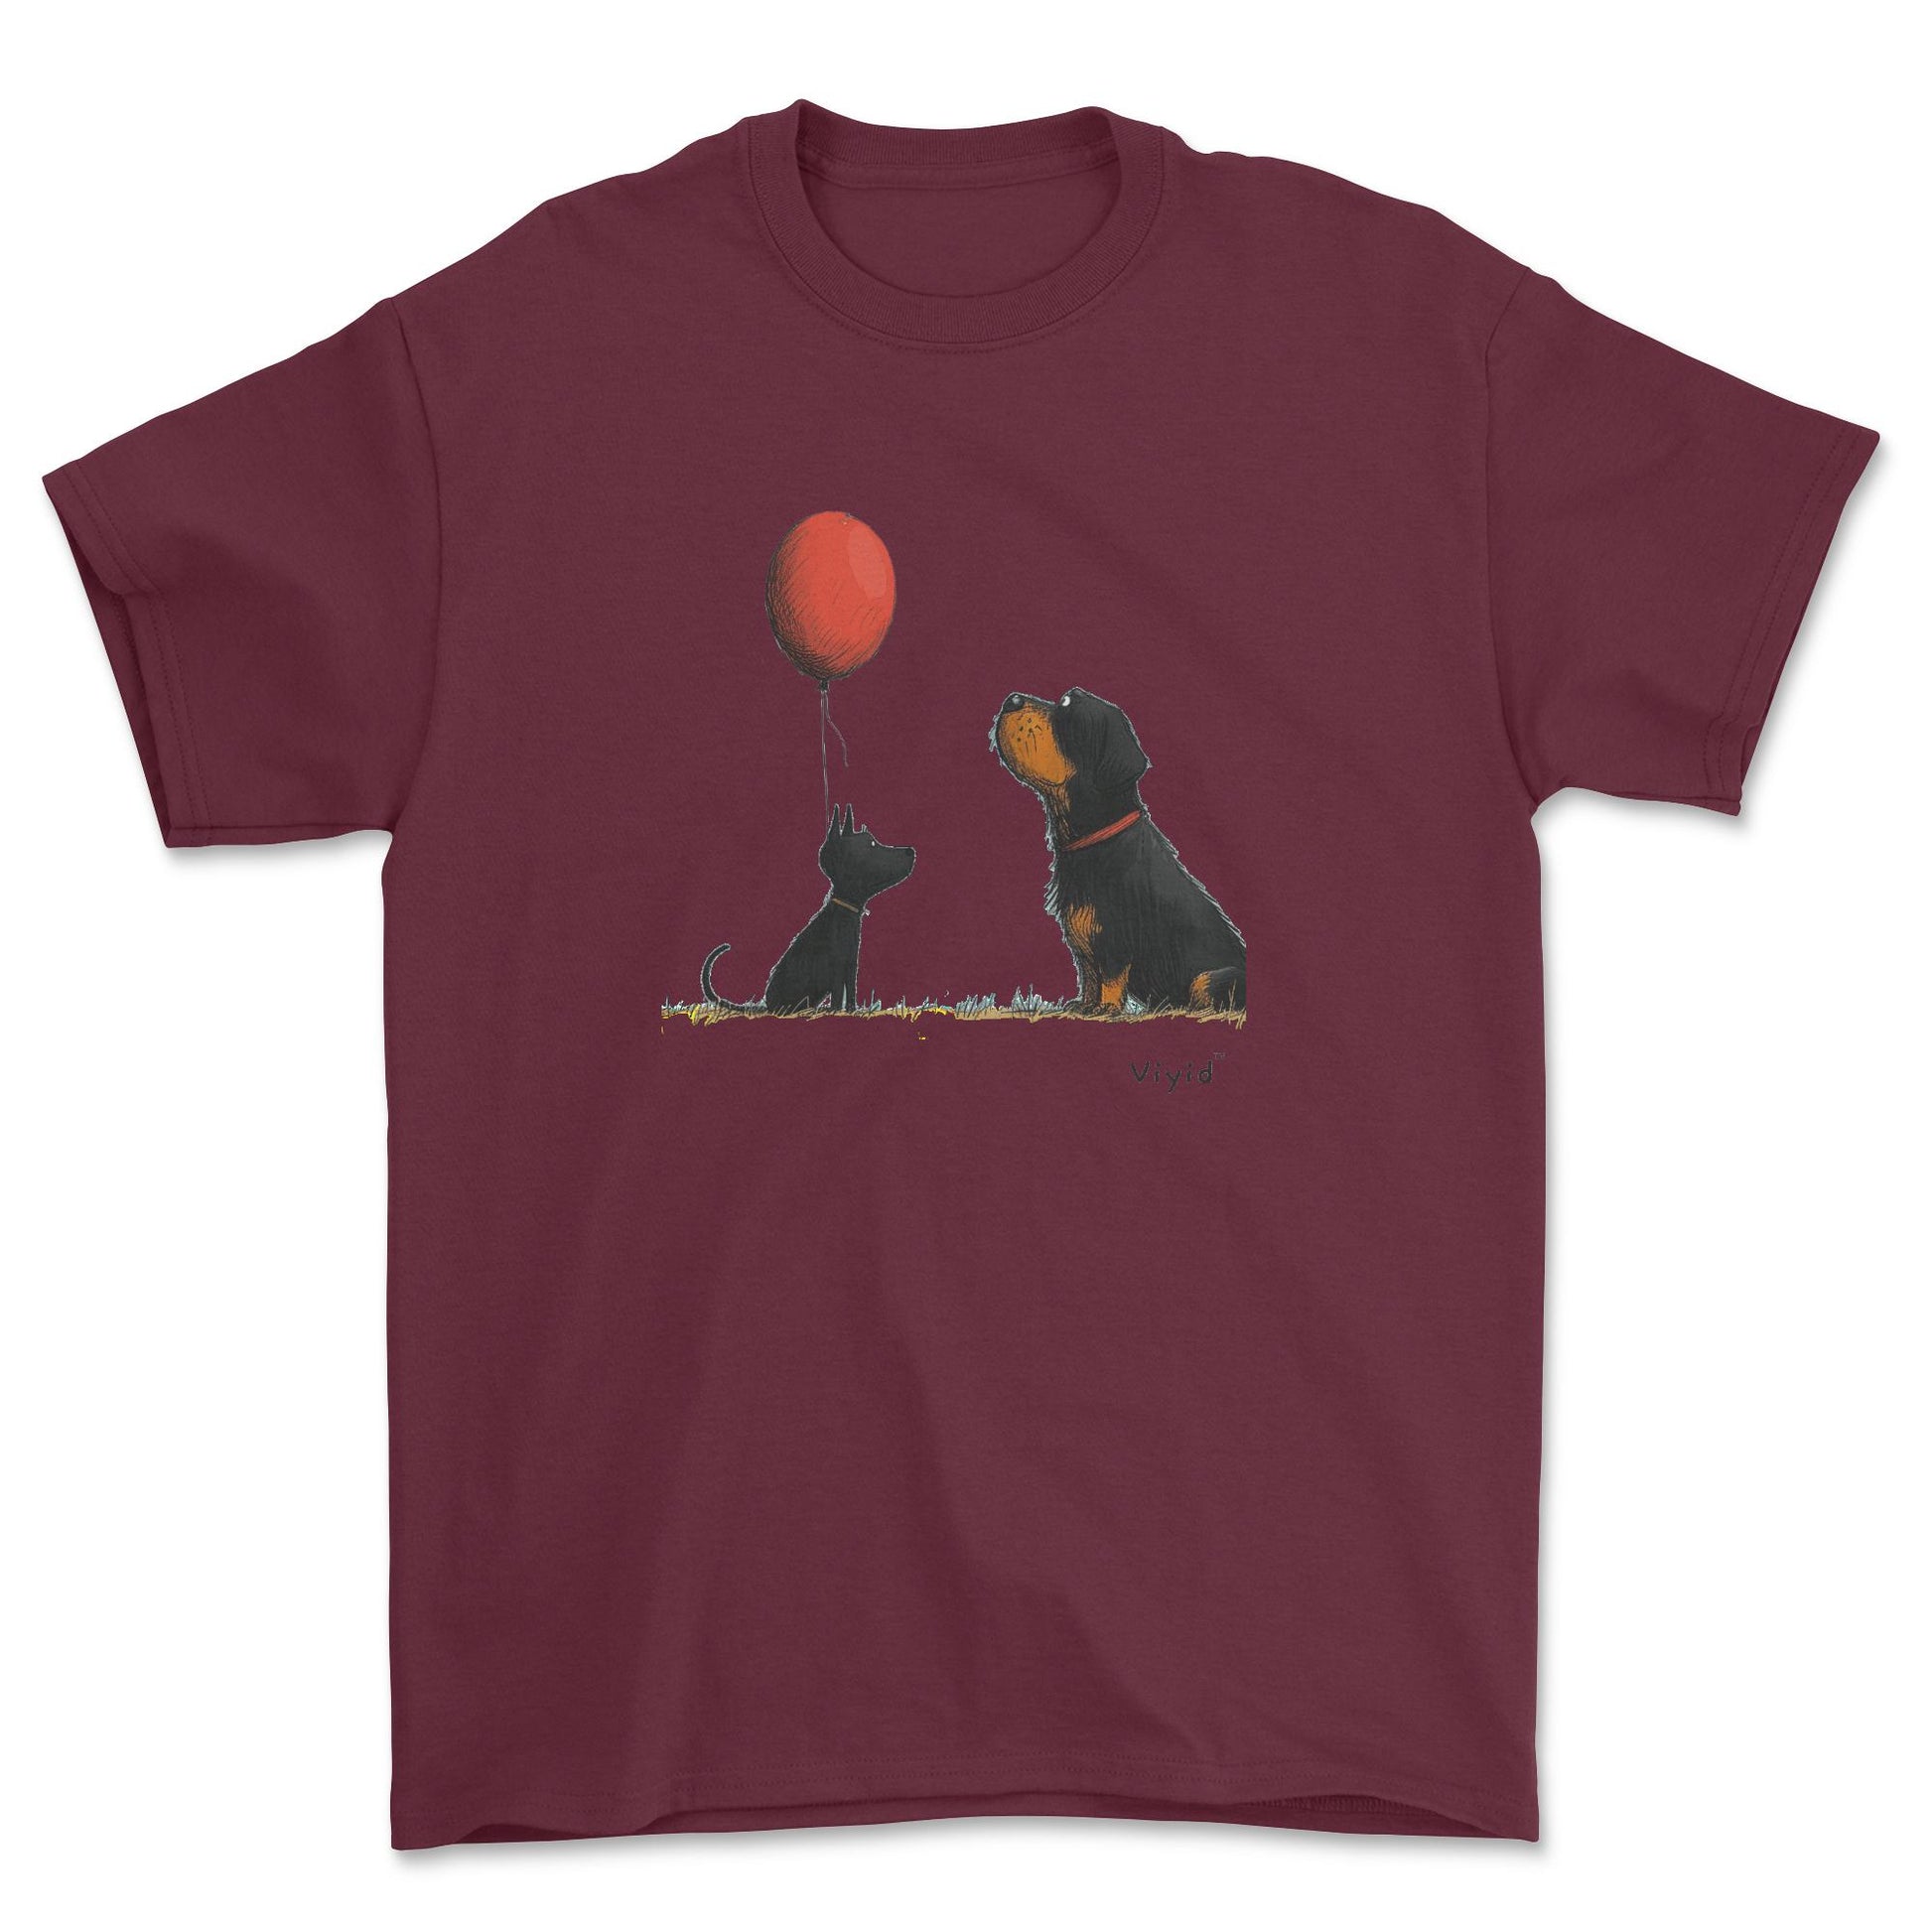 Rottweiler with balloon adult t-shirt maroon